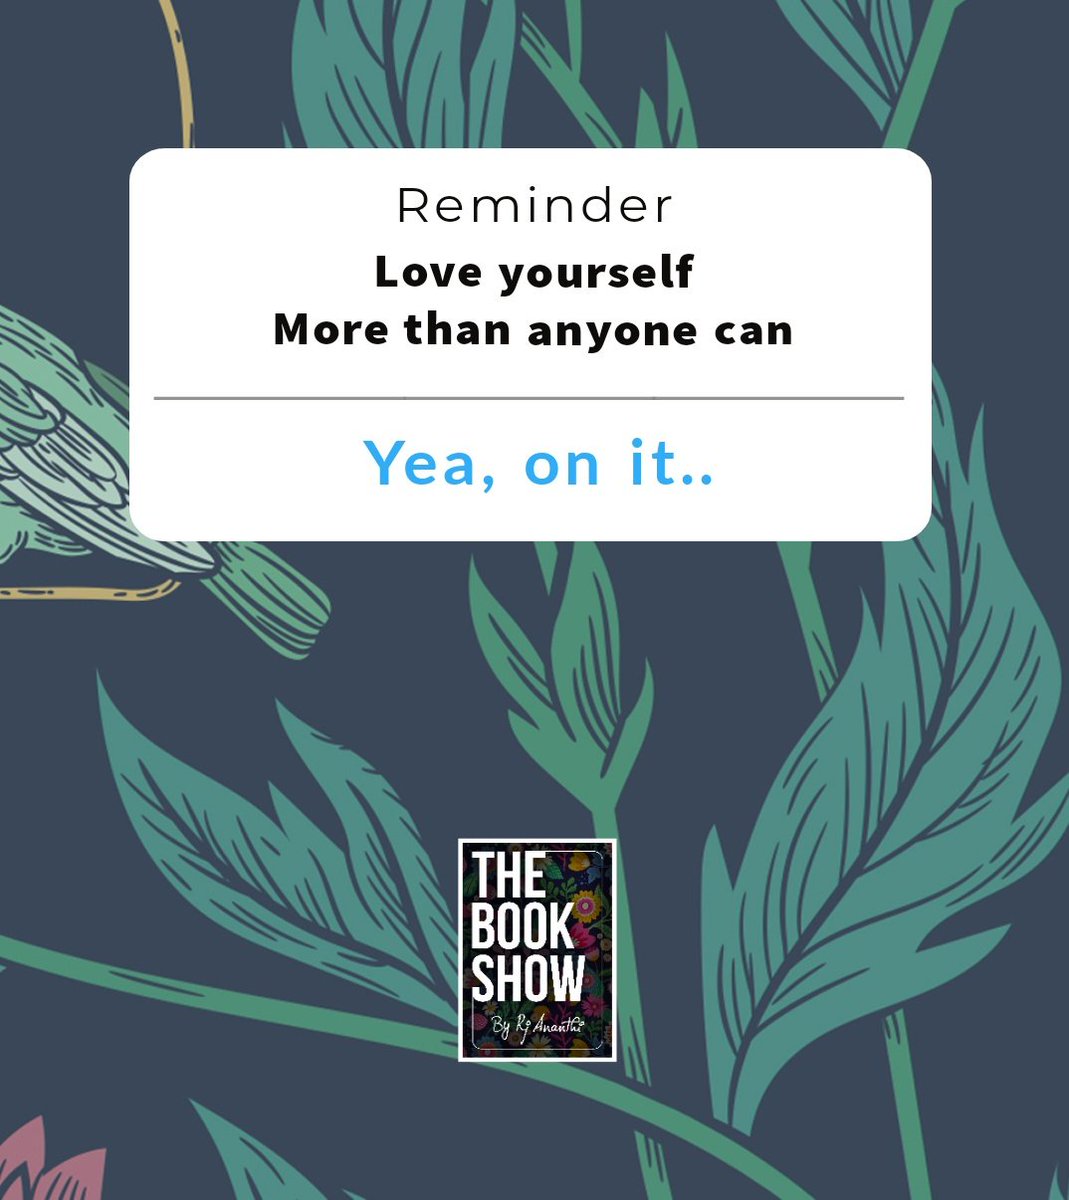 #KuttyReminder
Loving yourself is the most beautiful thing you can do to yourself ☺️🫶

Self love matters 😊💜✨
.
.
#TheBookShow #rjananthi #goodthoughts #Bookstagram #bookcommunity #bookblogger #booktuber #Bookfluencer #reading #readersofinstagram #readwithus #booktwitter